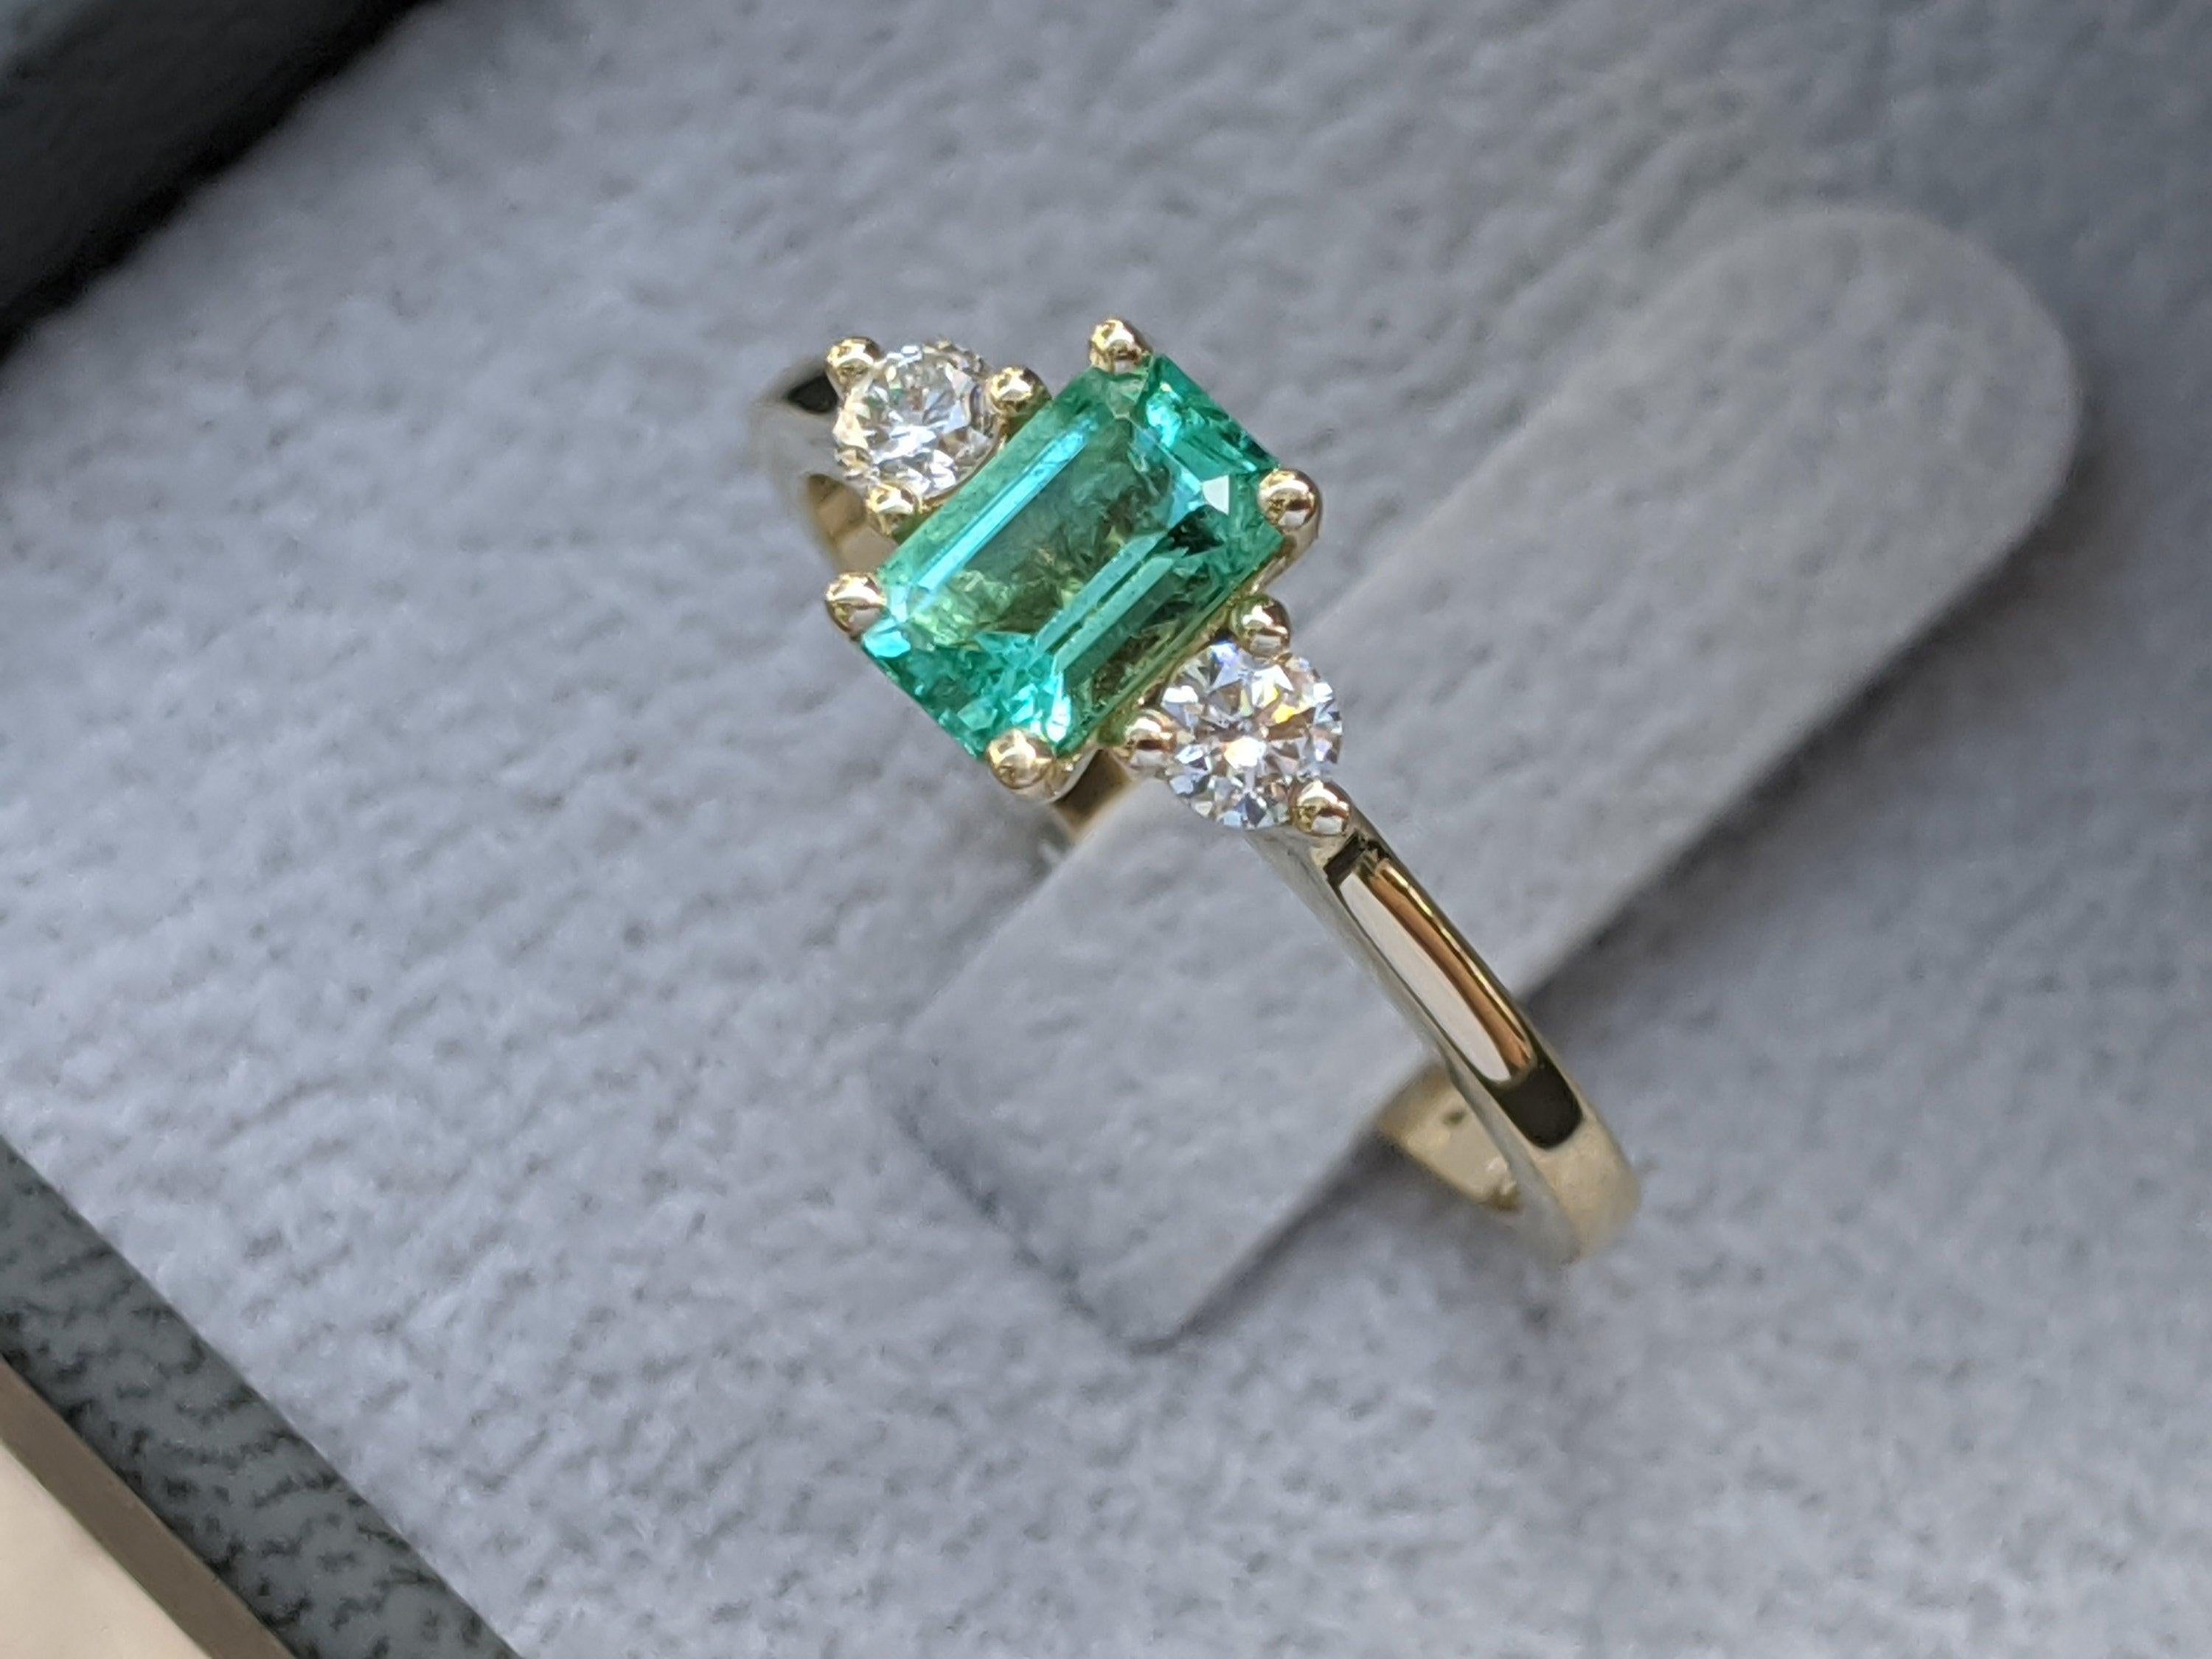 3 Stone Emerald Ring, Emerald And Diamonds Engagement Ring, Trilogy Ring, Yellow Gold Promise Ring, Anniversary Gift, Natural Green Emerald
 
 Main Stone Name: Emerald Cut Natural Emerald
 Main Stone Weight: 0.60ct.
 Main Stone Clarity: Eye Clean
